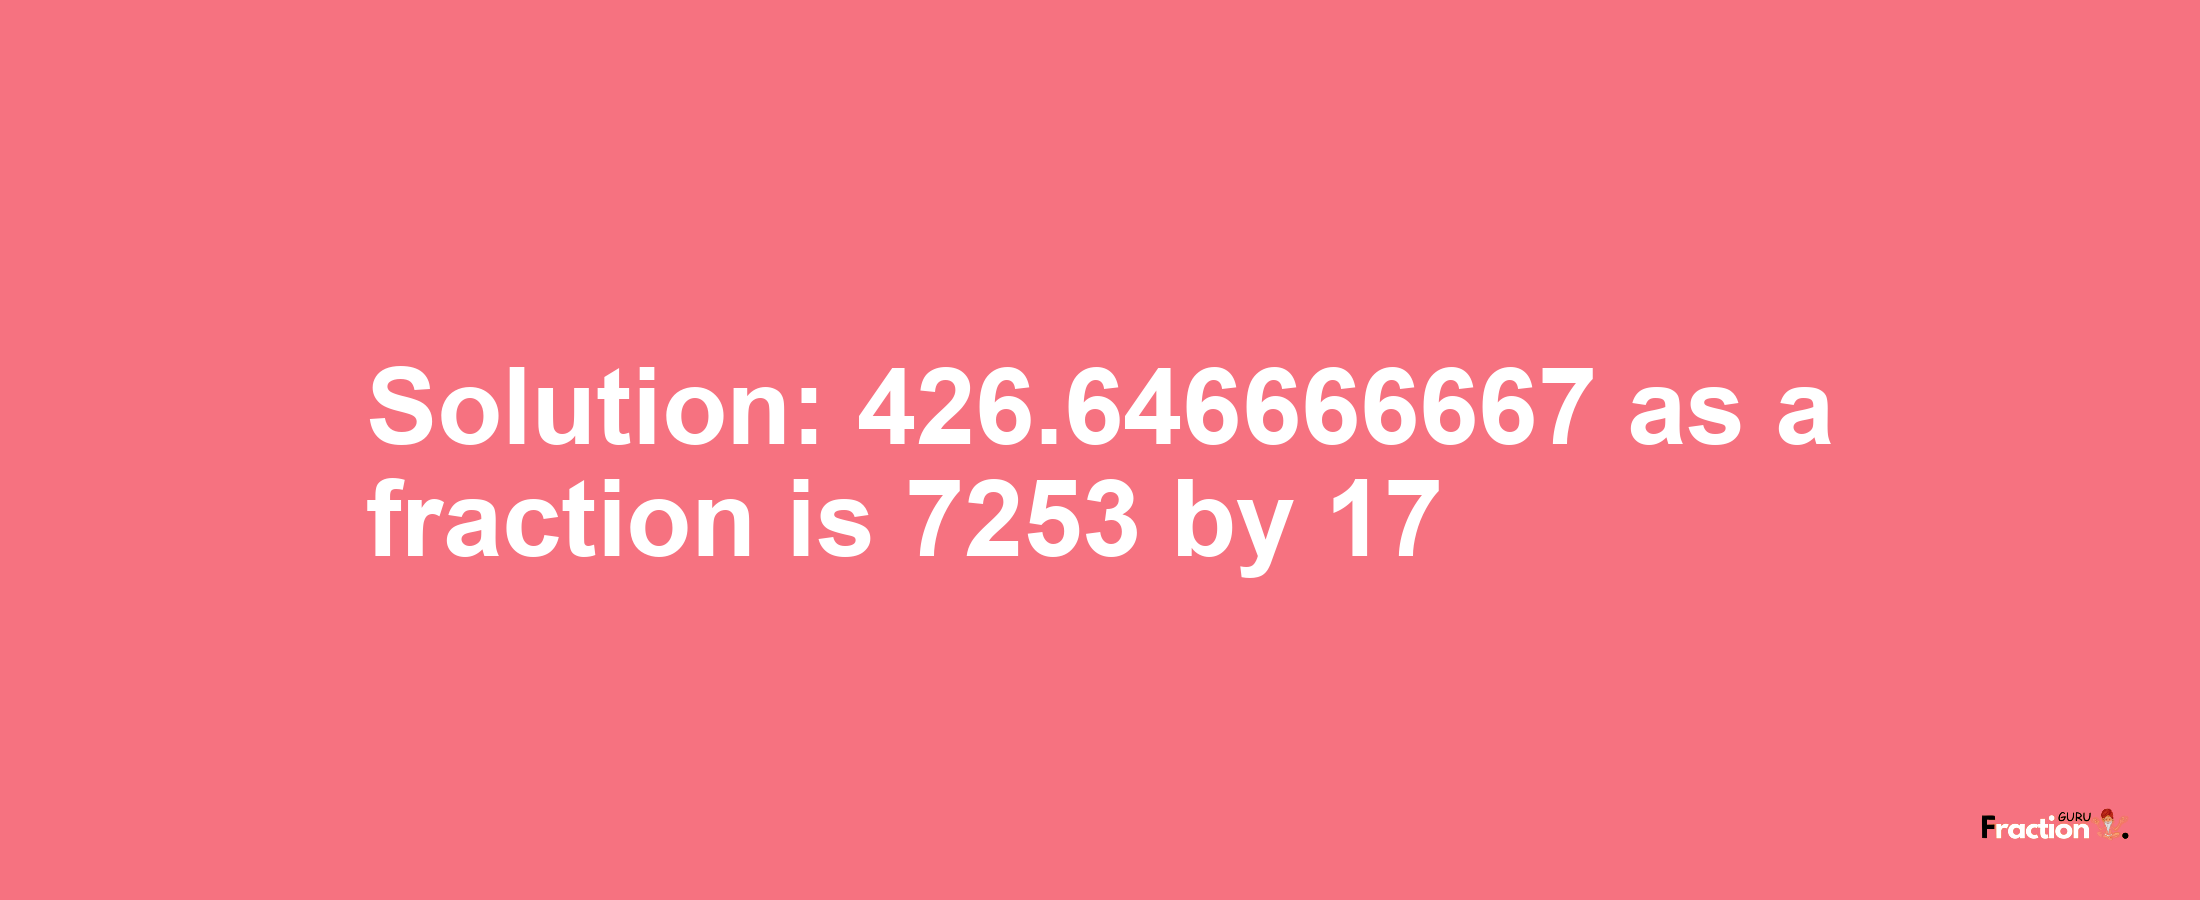 Solution:426.646666667 as a fraction is 7253/17